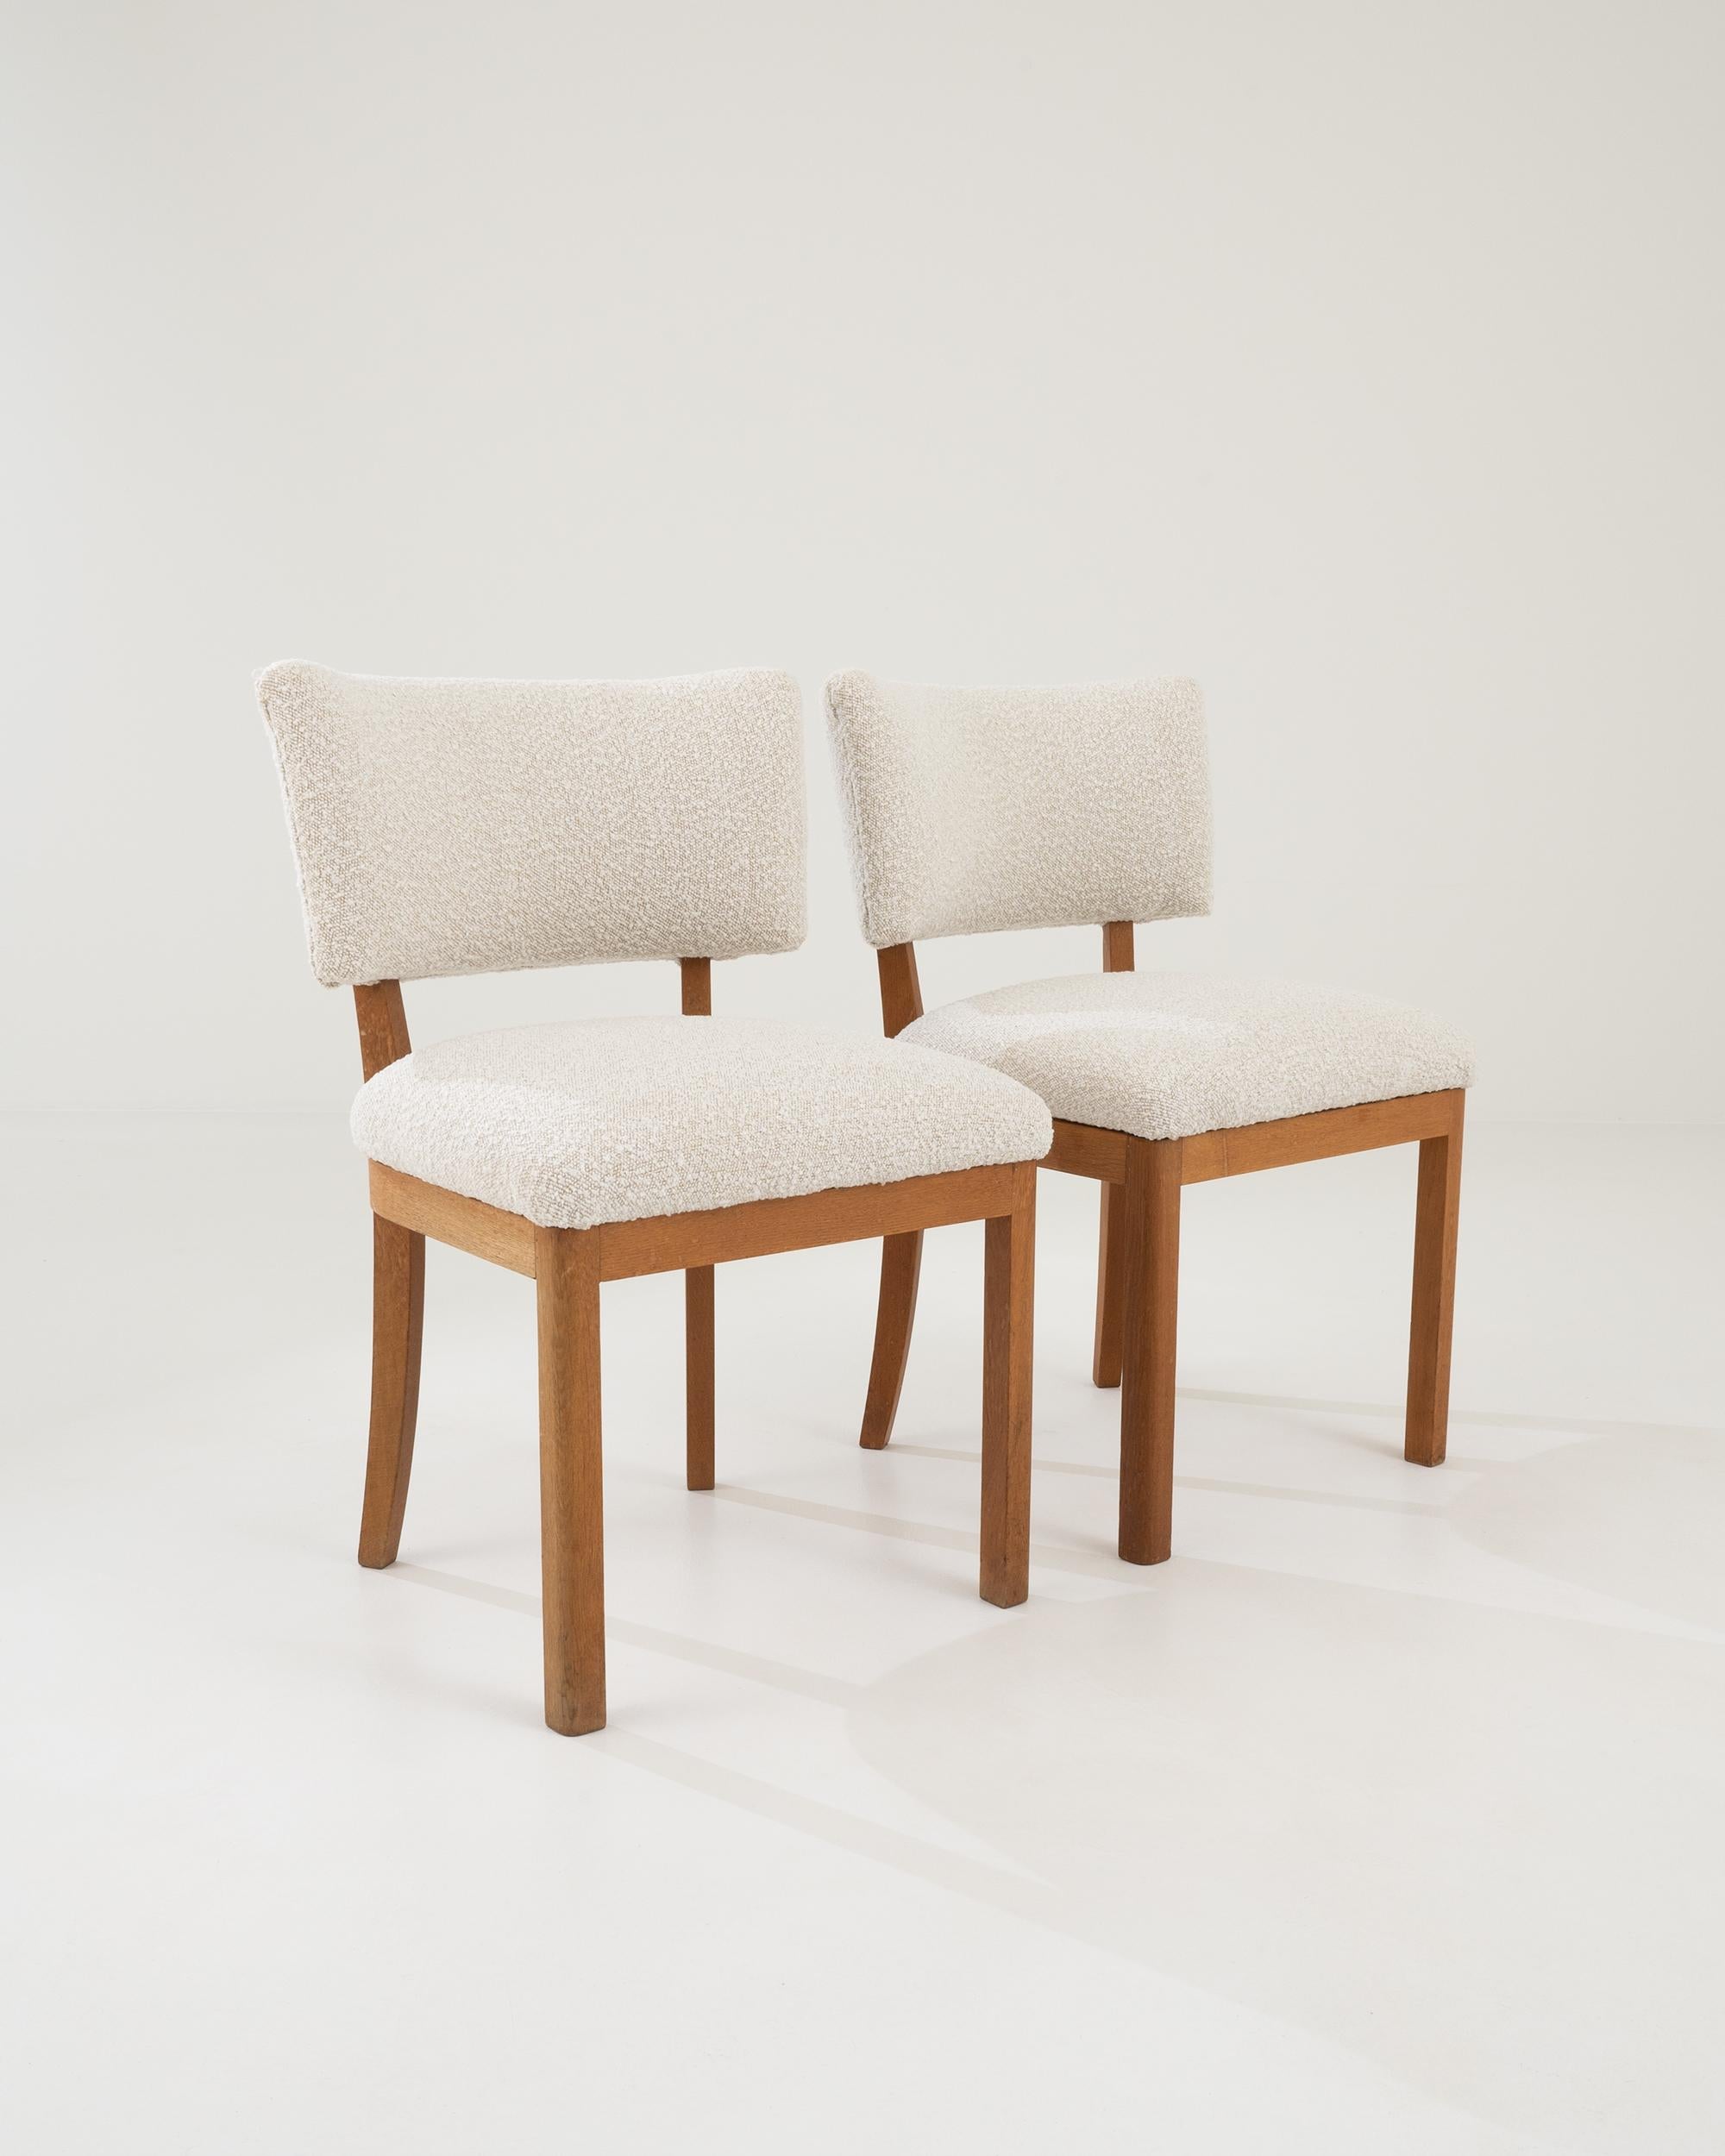 20th Century Czech Upholstered Dining Chairs, a Pair For Sale 2